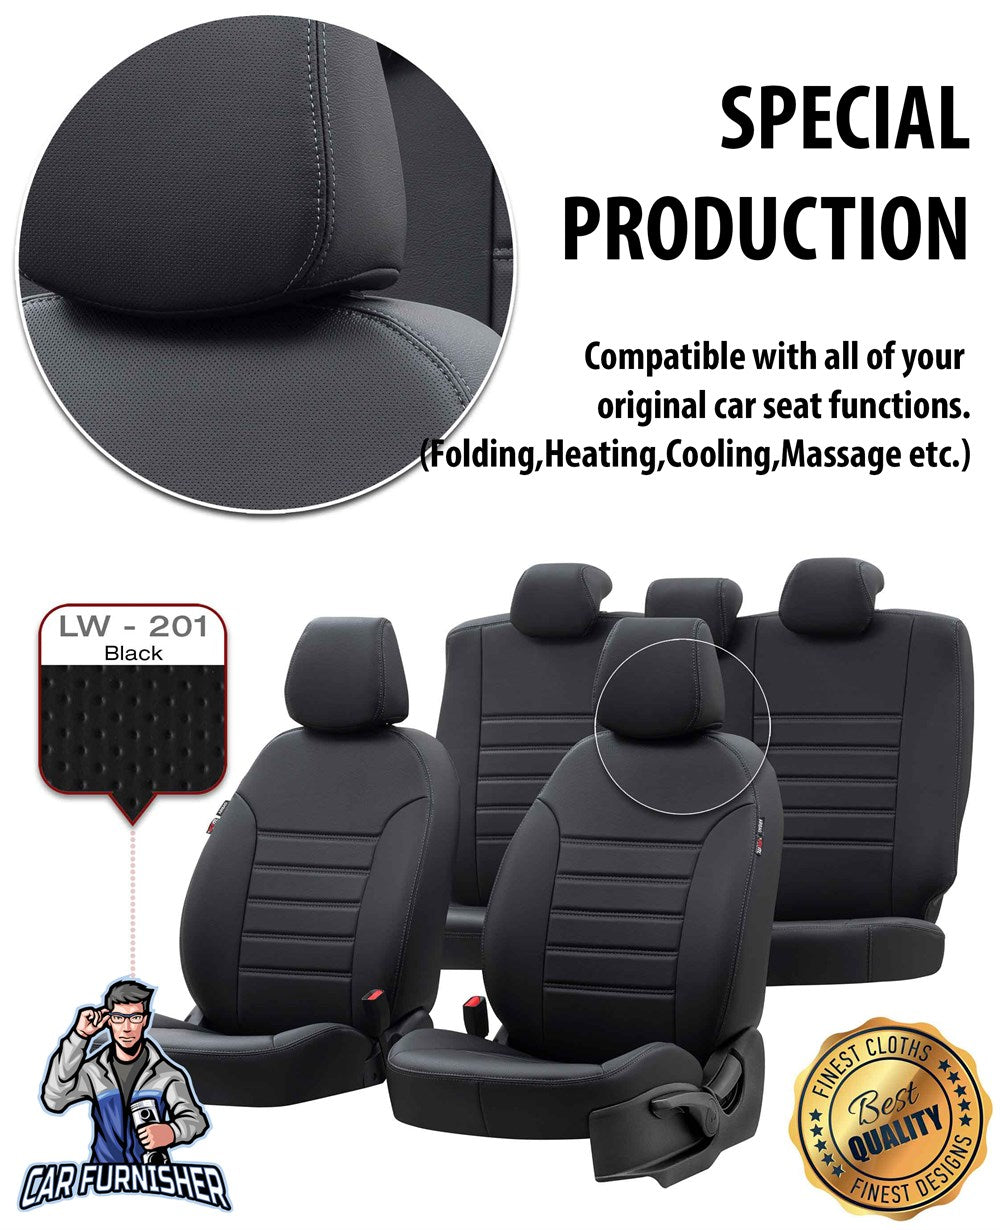 Nissan Qashqai Seat Covers Istanbul Leather Design Smoked Black Leather